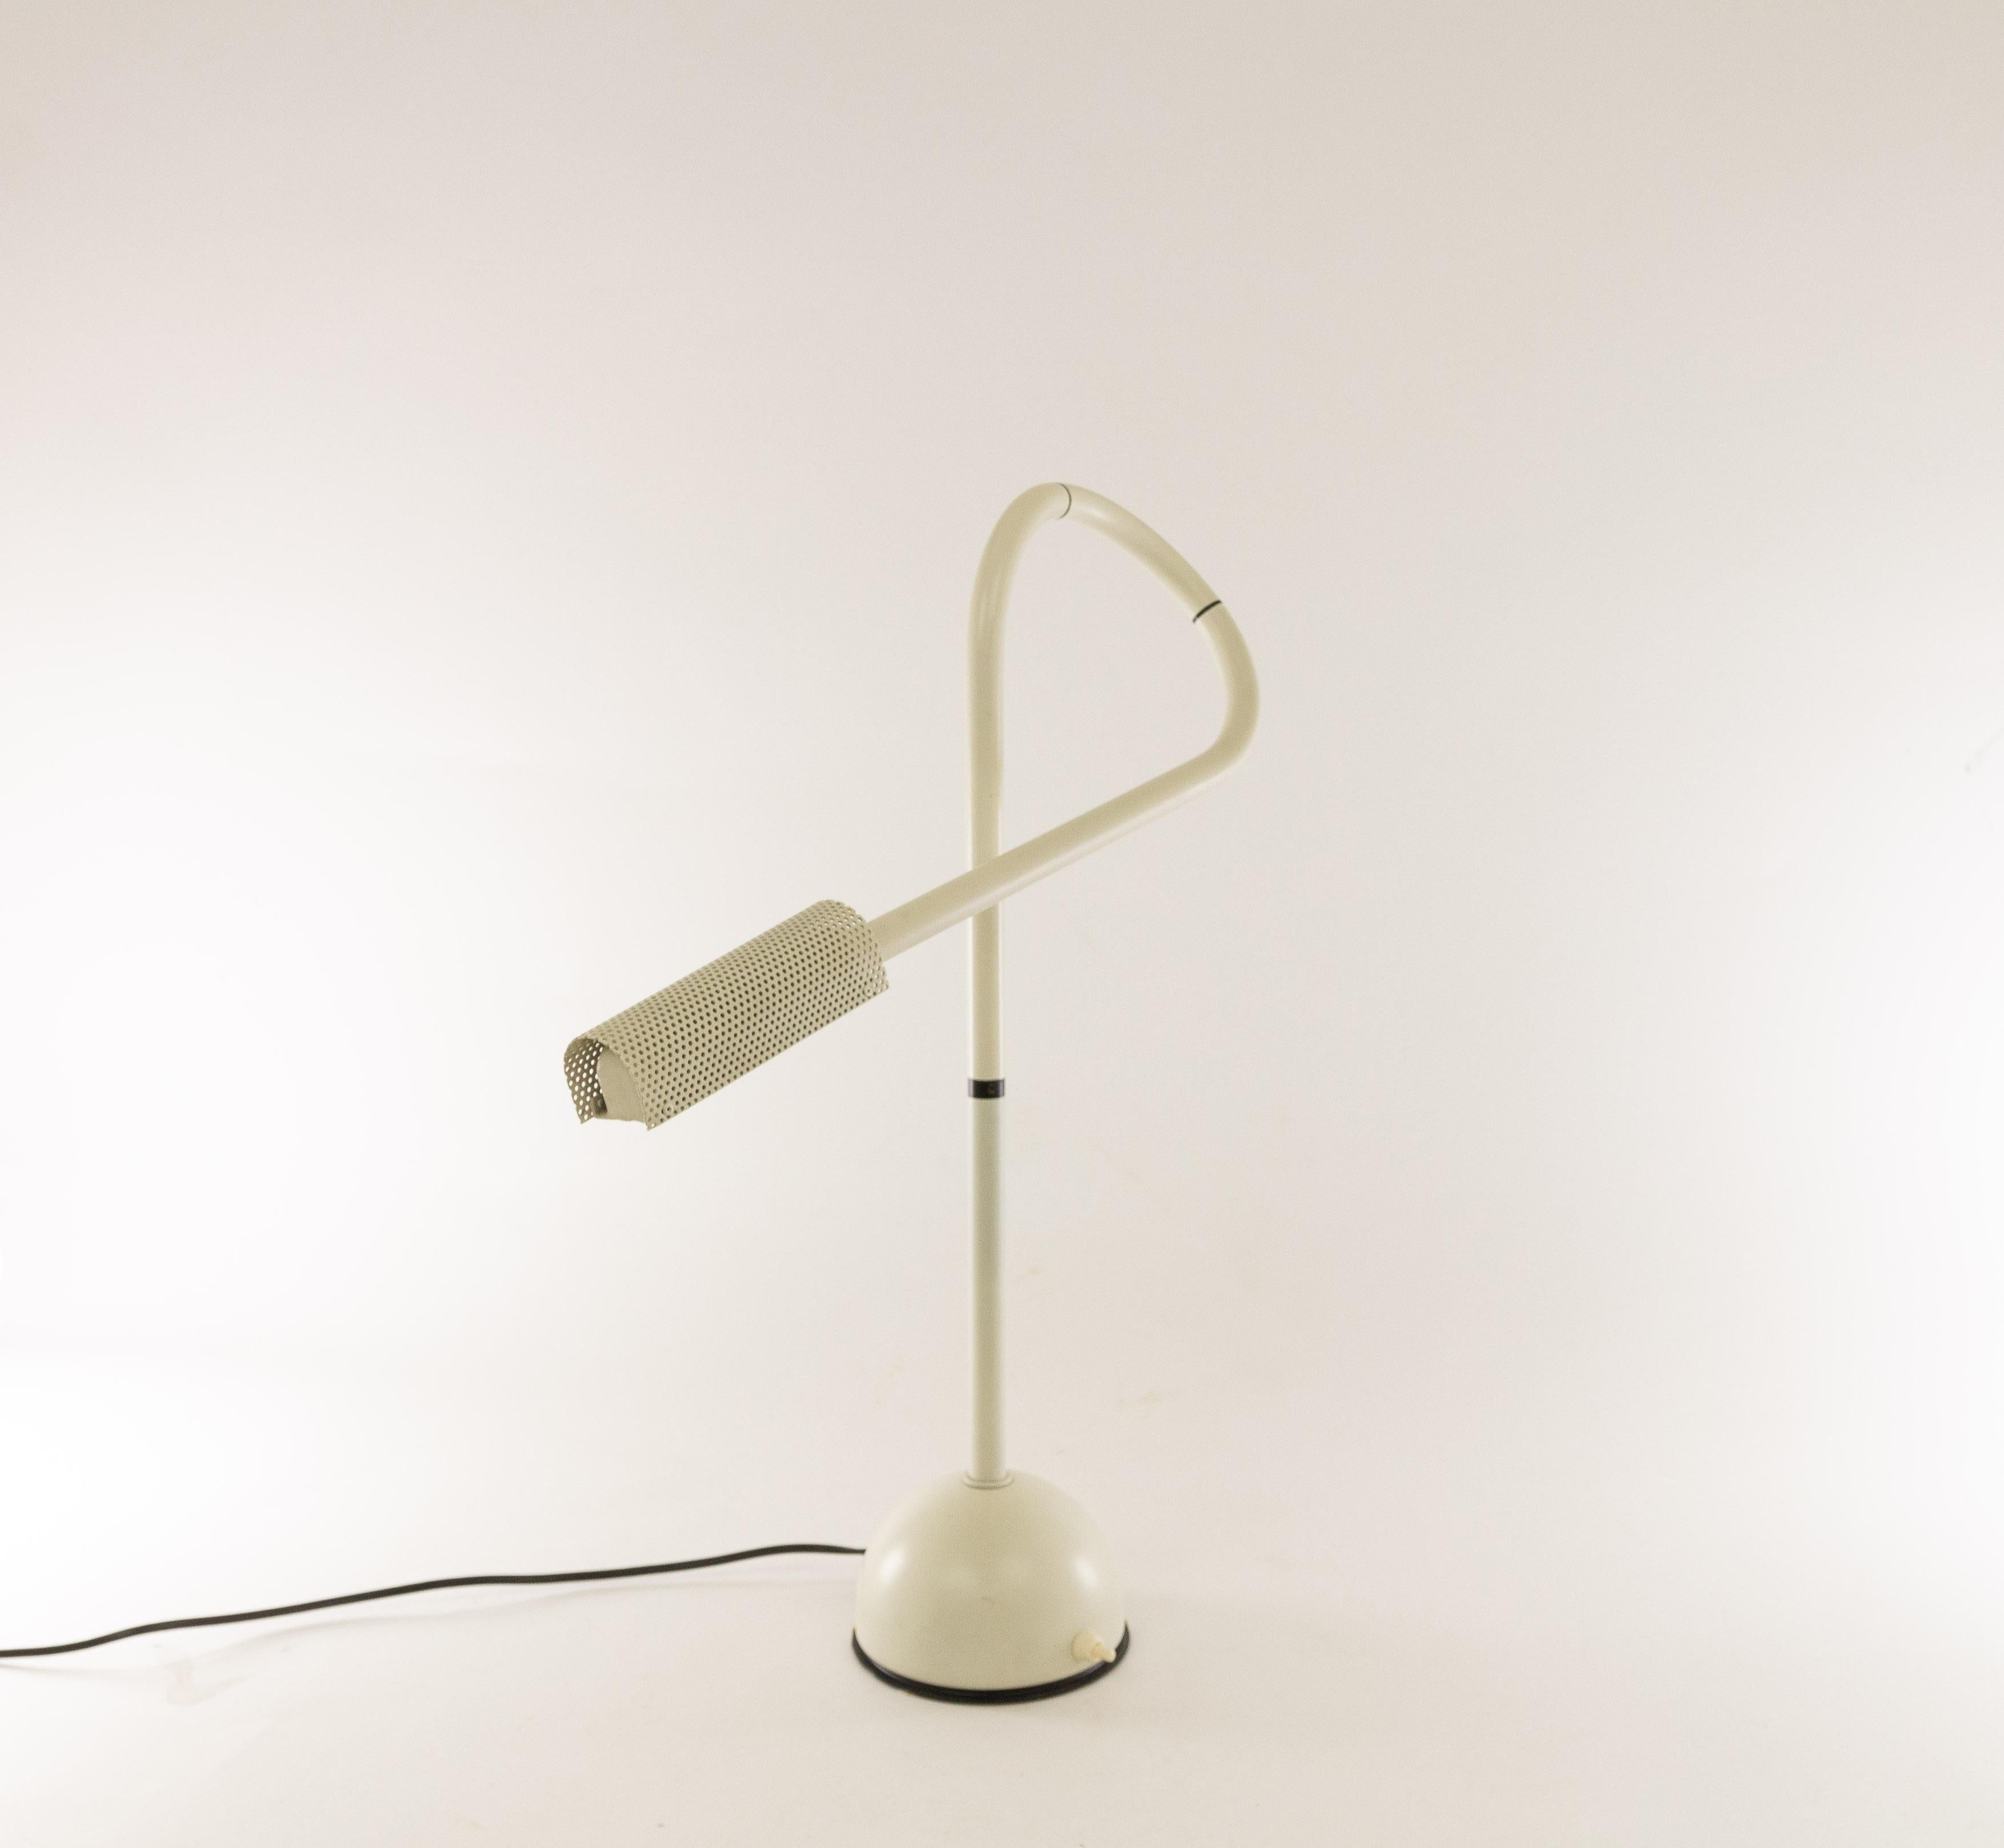 Stringa table lamp created by Dutch designer Hans Ansems and manufactured by Luxo Italiana in 1982.

The original structure and a brilliant technological solution of the table lamp allow full flexibility and offer continuous visual